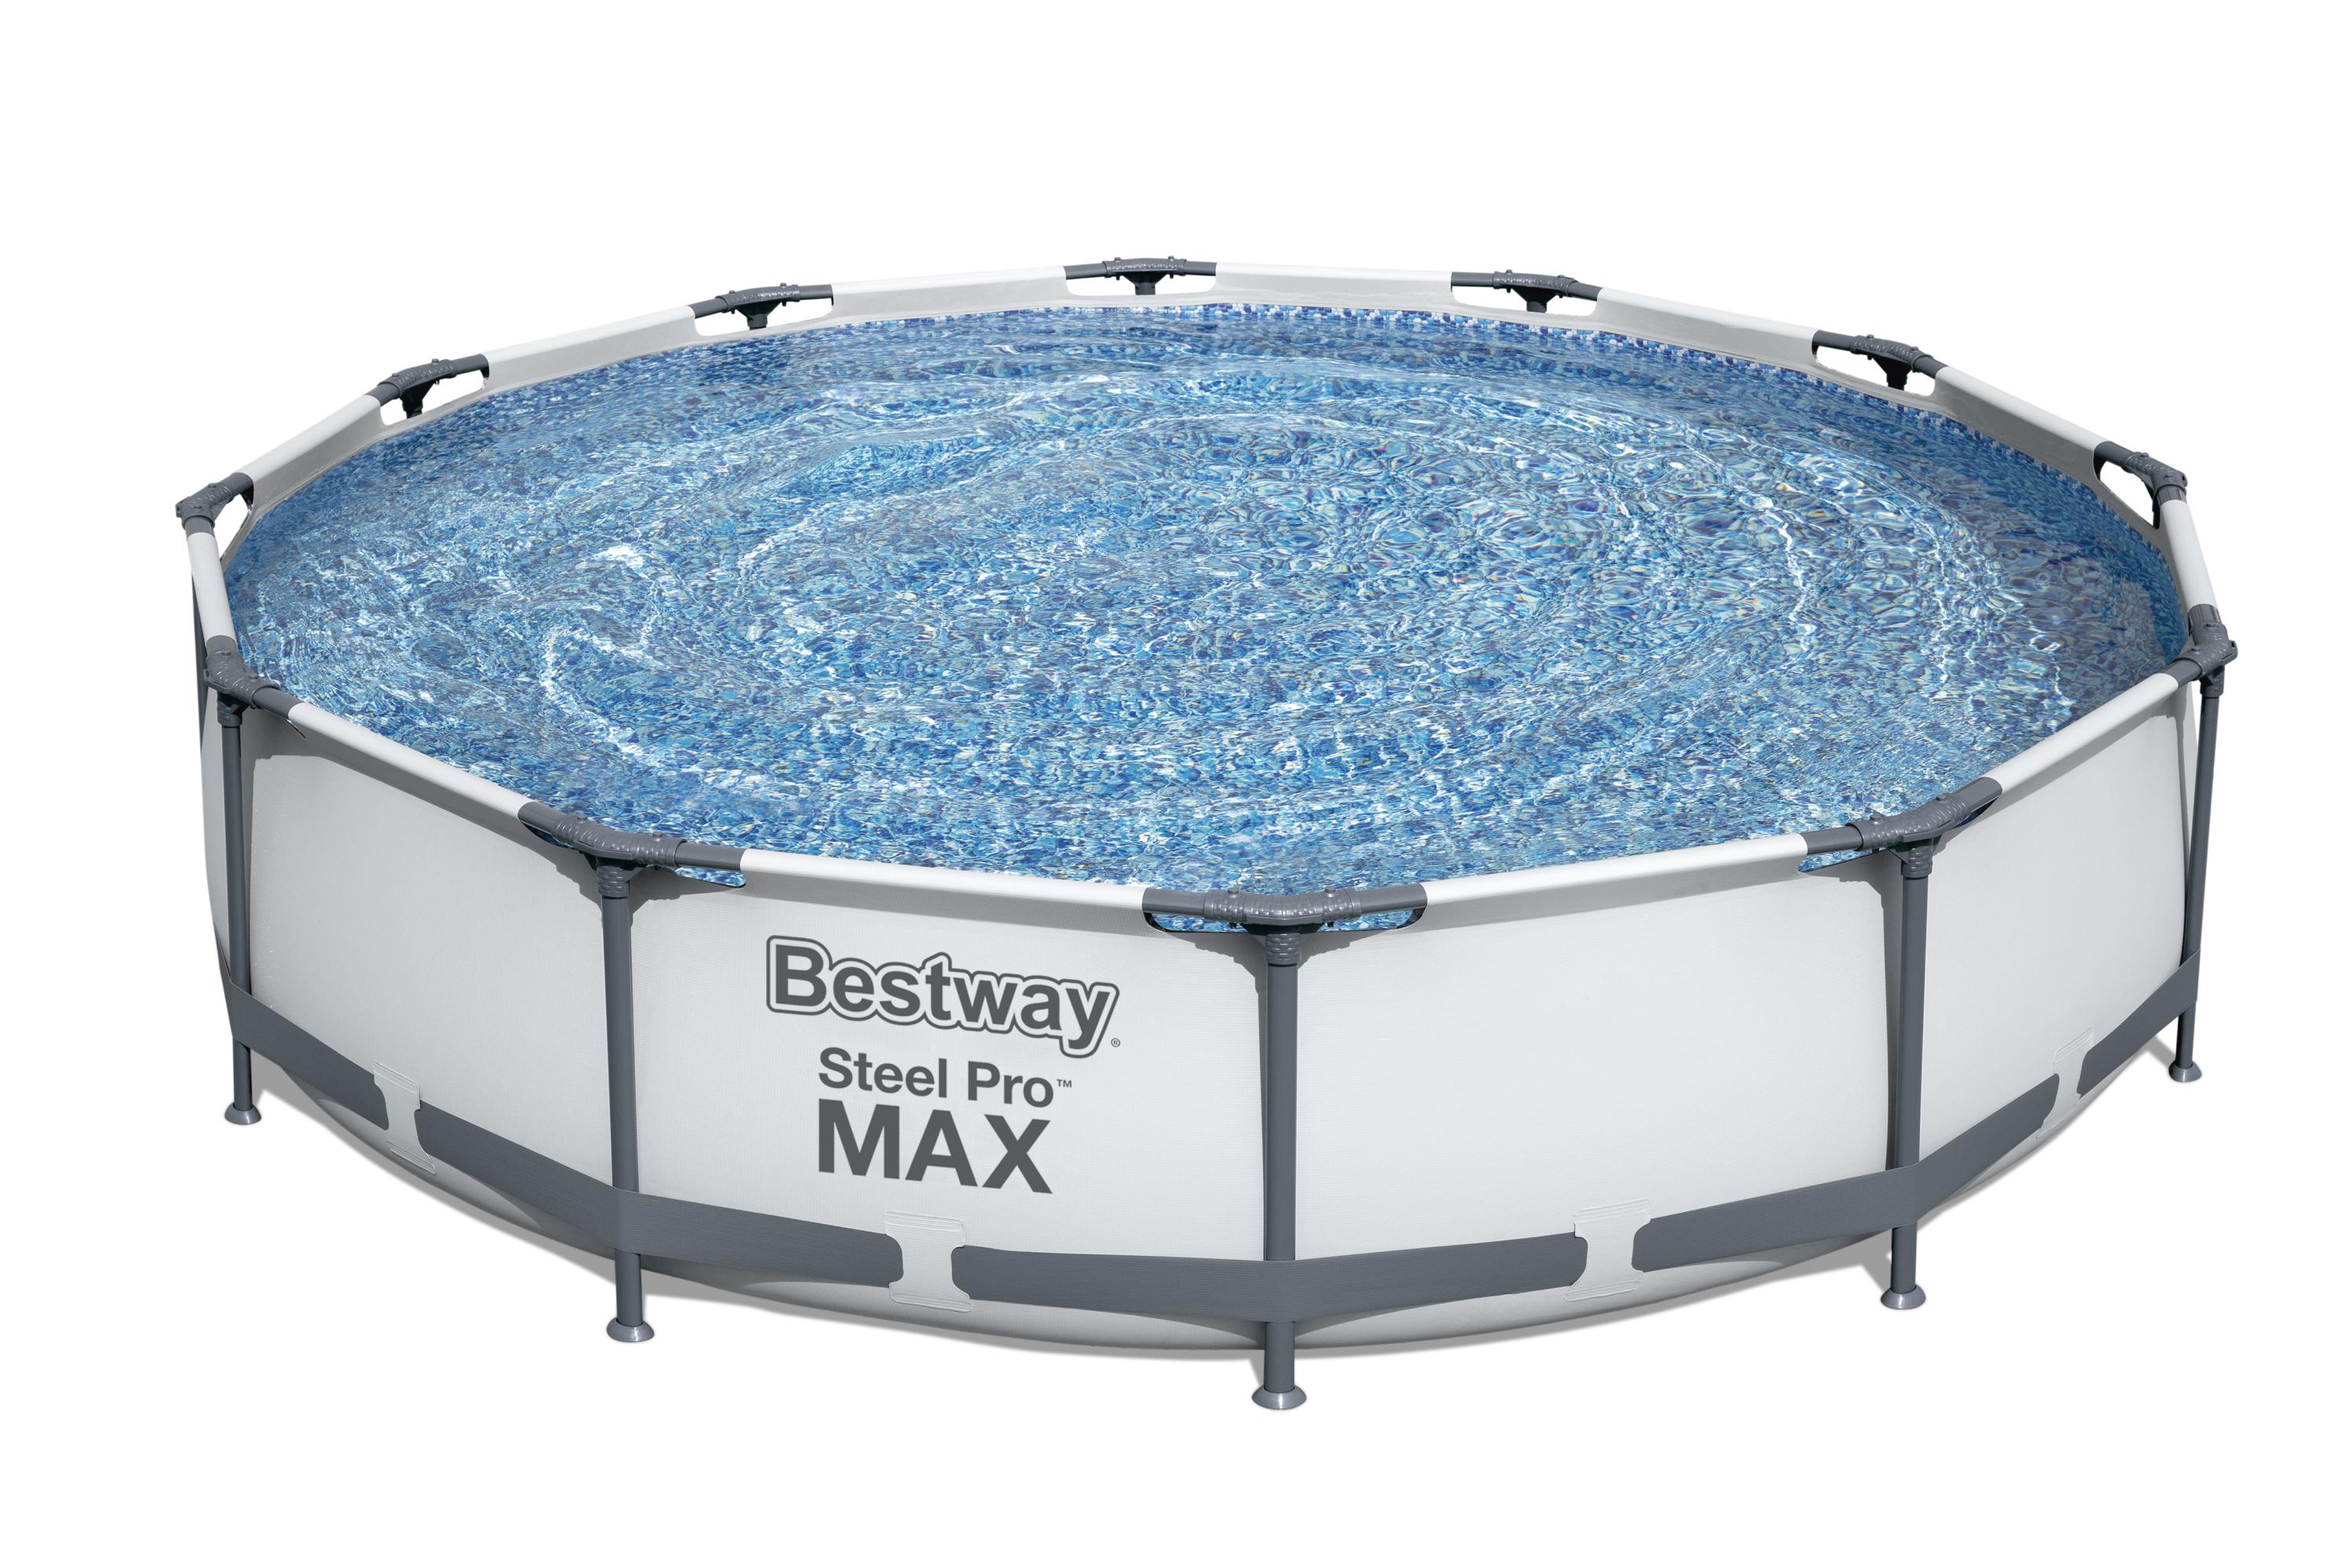 Bestway Steel Pro Max Swimming Pool Set with 330 GPH Filter Pump, 12' x 30" - image 1 of 9